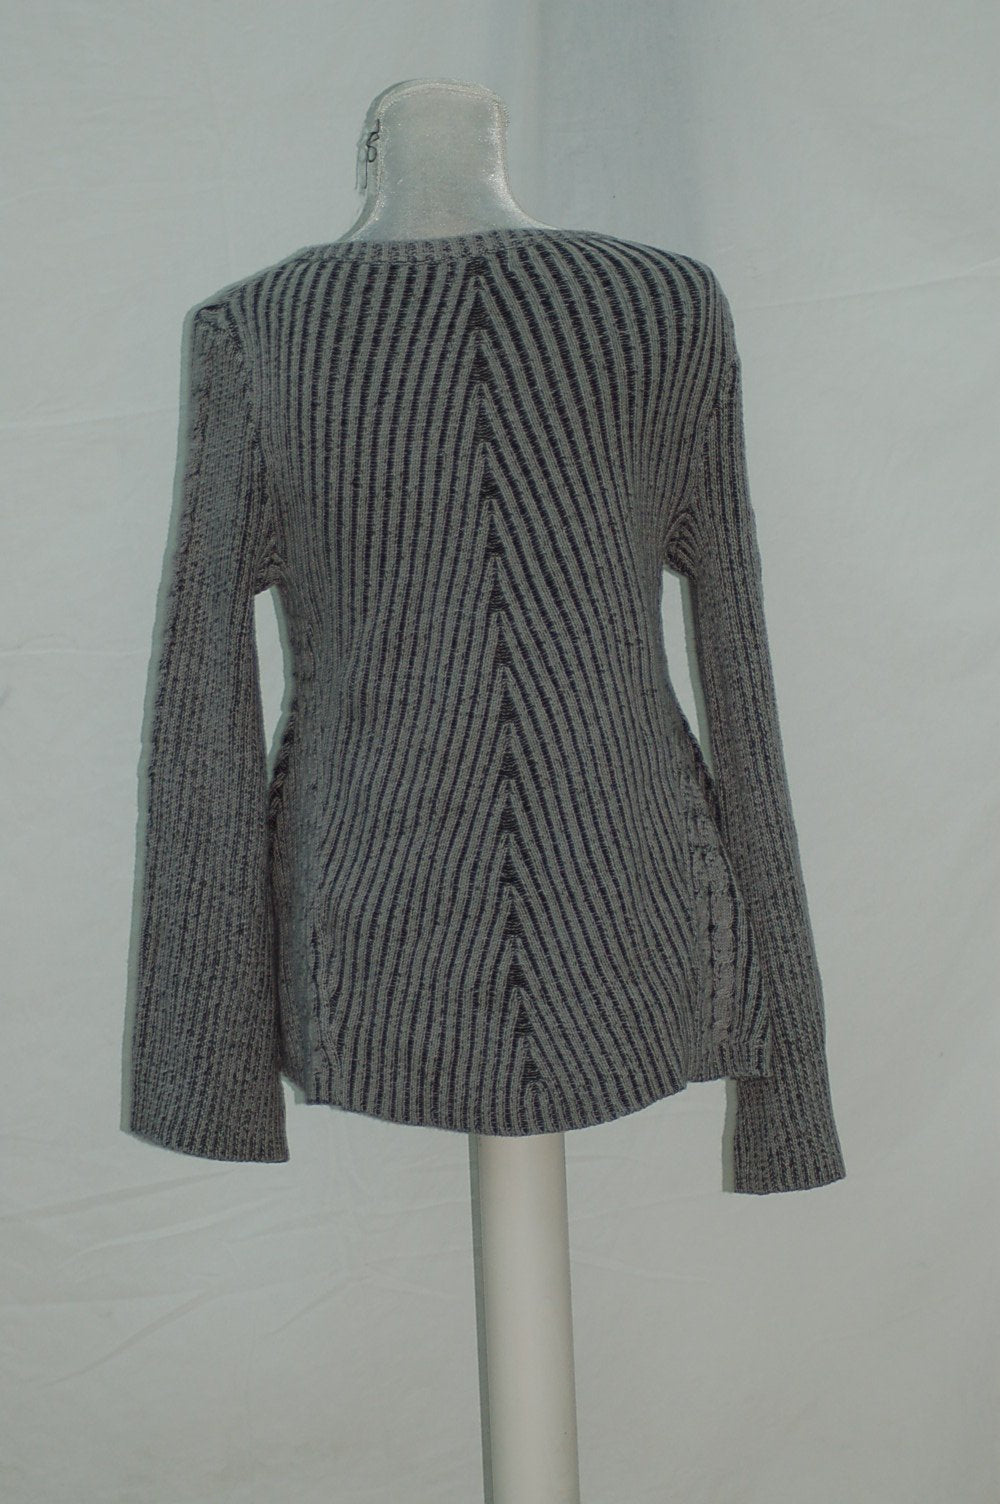 STYLE CO WOMEN'S SWEATER, GRAY, MEDIUM - NEW WITHOUT TAG 4796